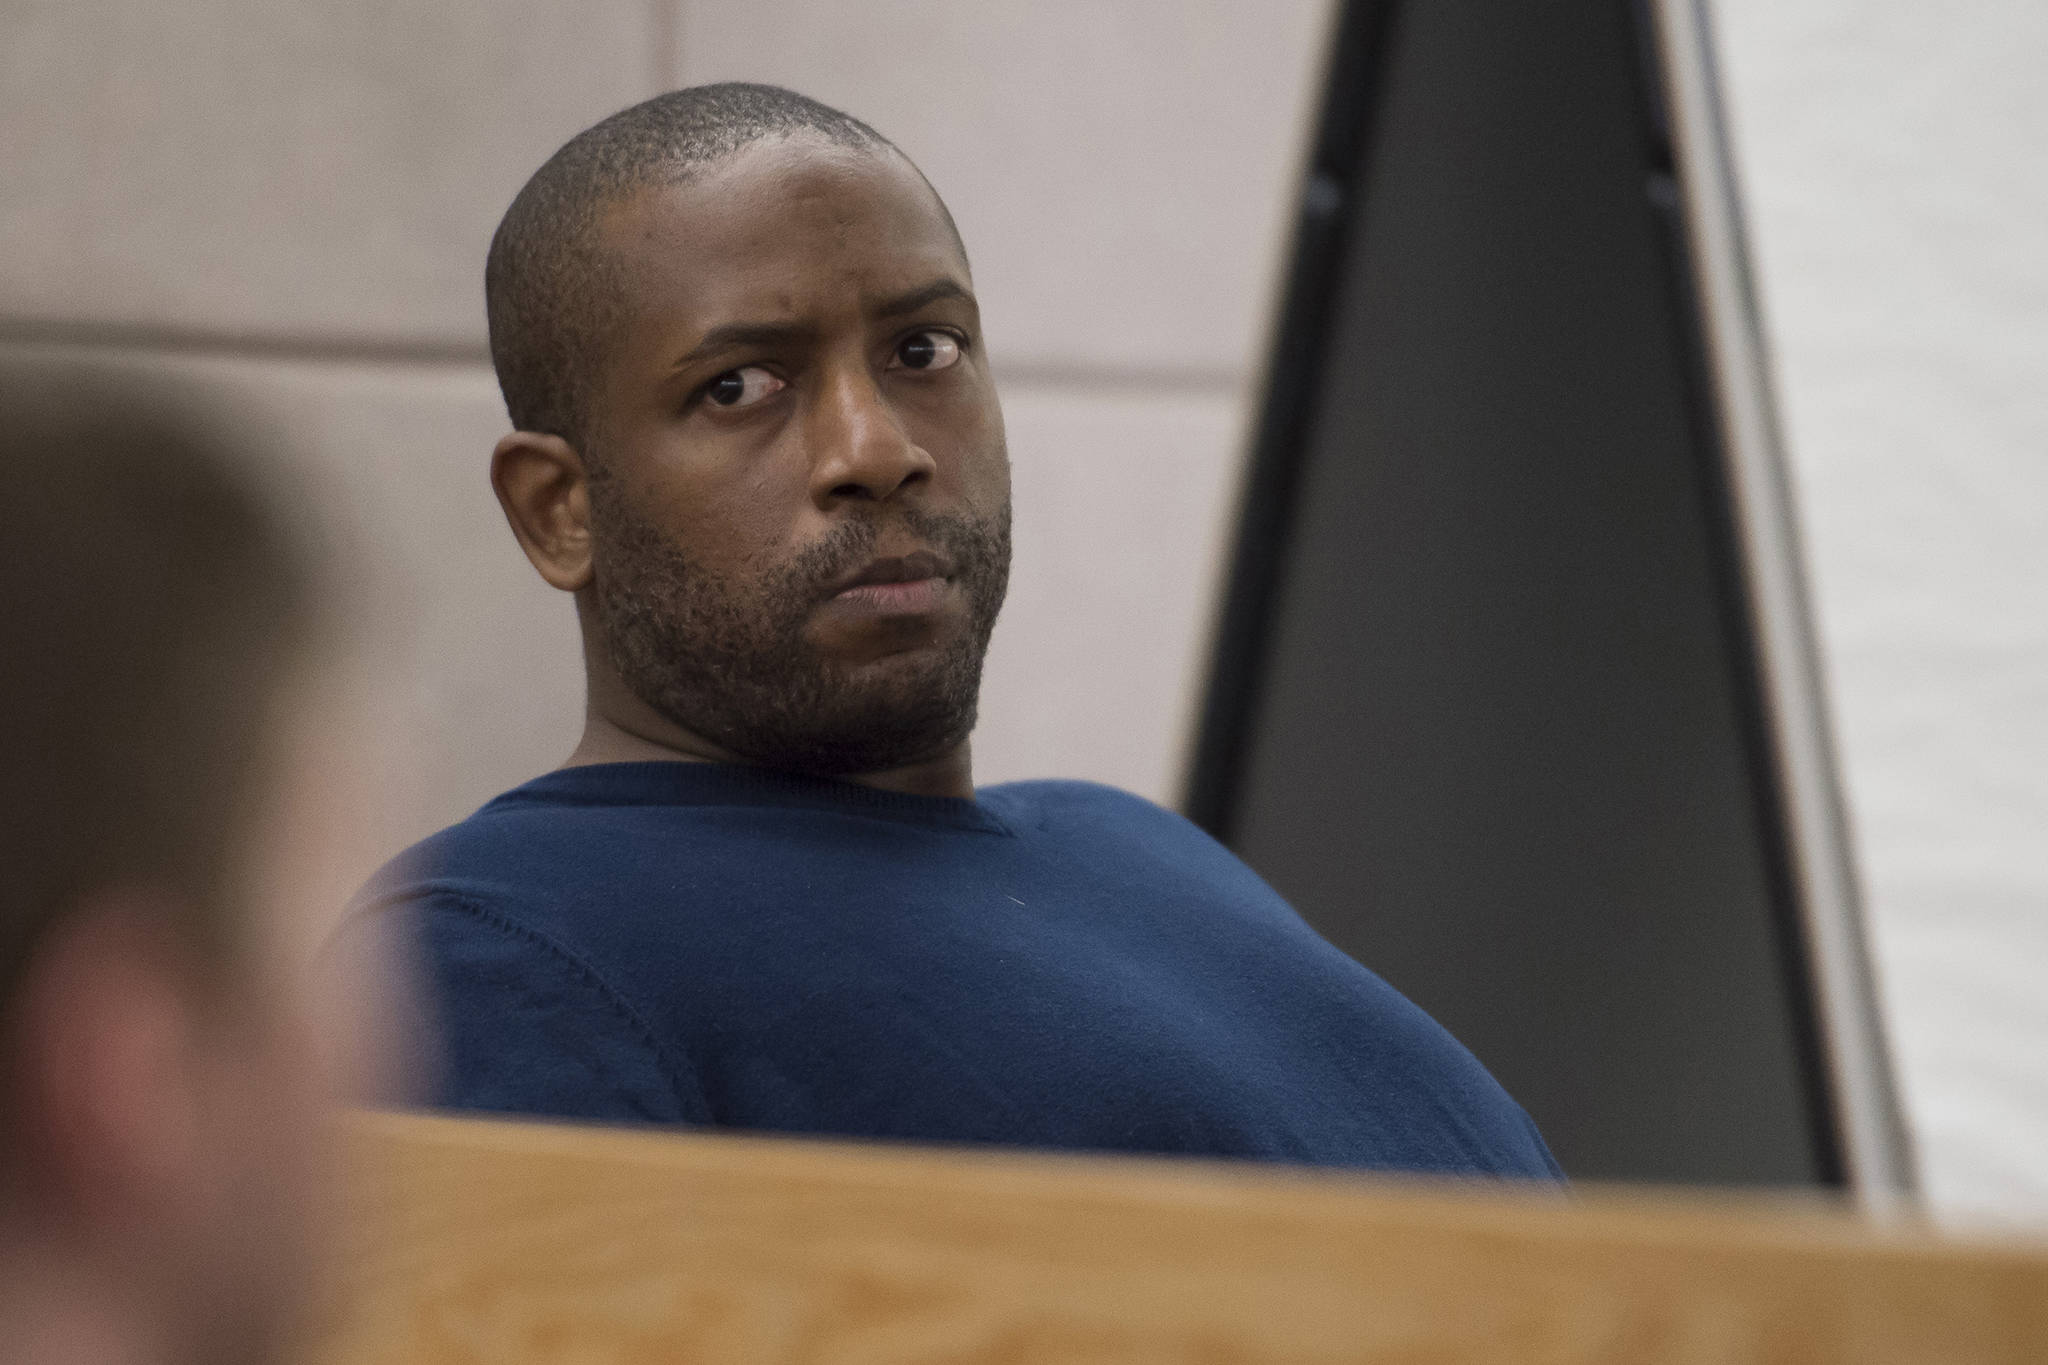 Laron Carlton Graham appears in Juneau Superior Court on Monday, Feb. 26, 2018, for an arraignment on two counts of first-degree murder for the Nov. 15, 2015 shooting deaths of 36-year-old Robert H. Meireis and 34-year-old Elizabeth K. Tonsmeire. (Michael Penn | Juneau Empire File)